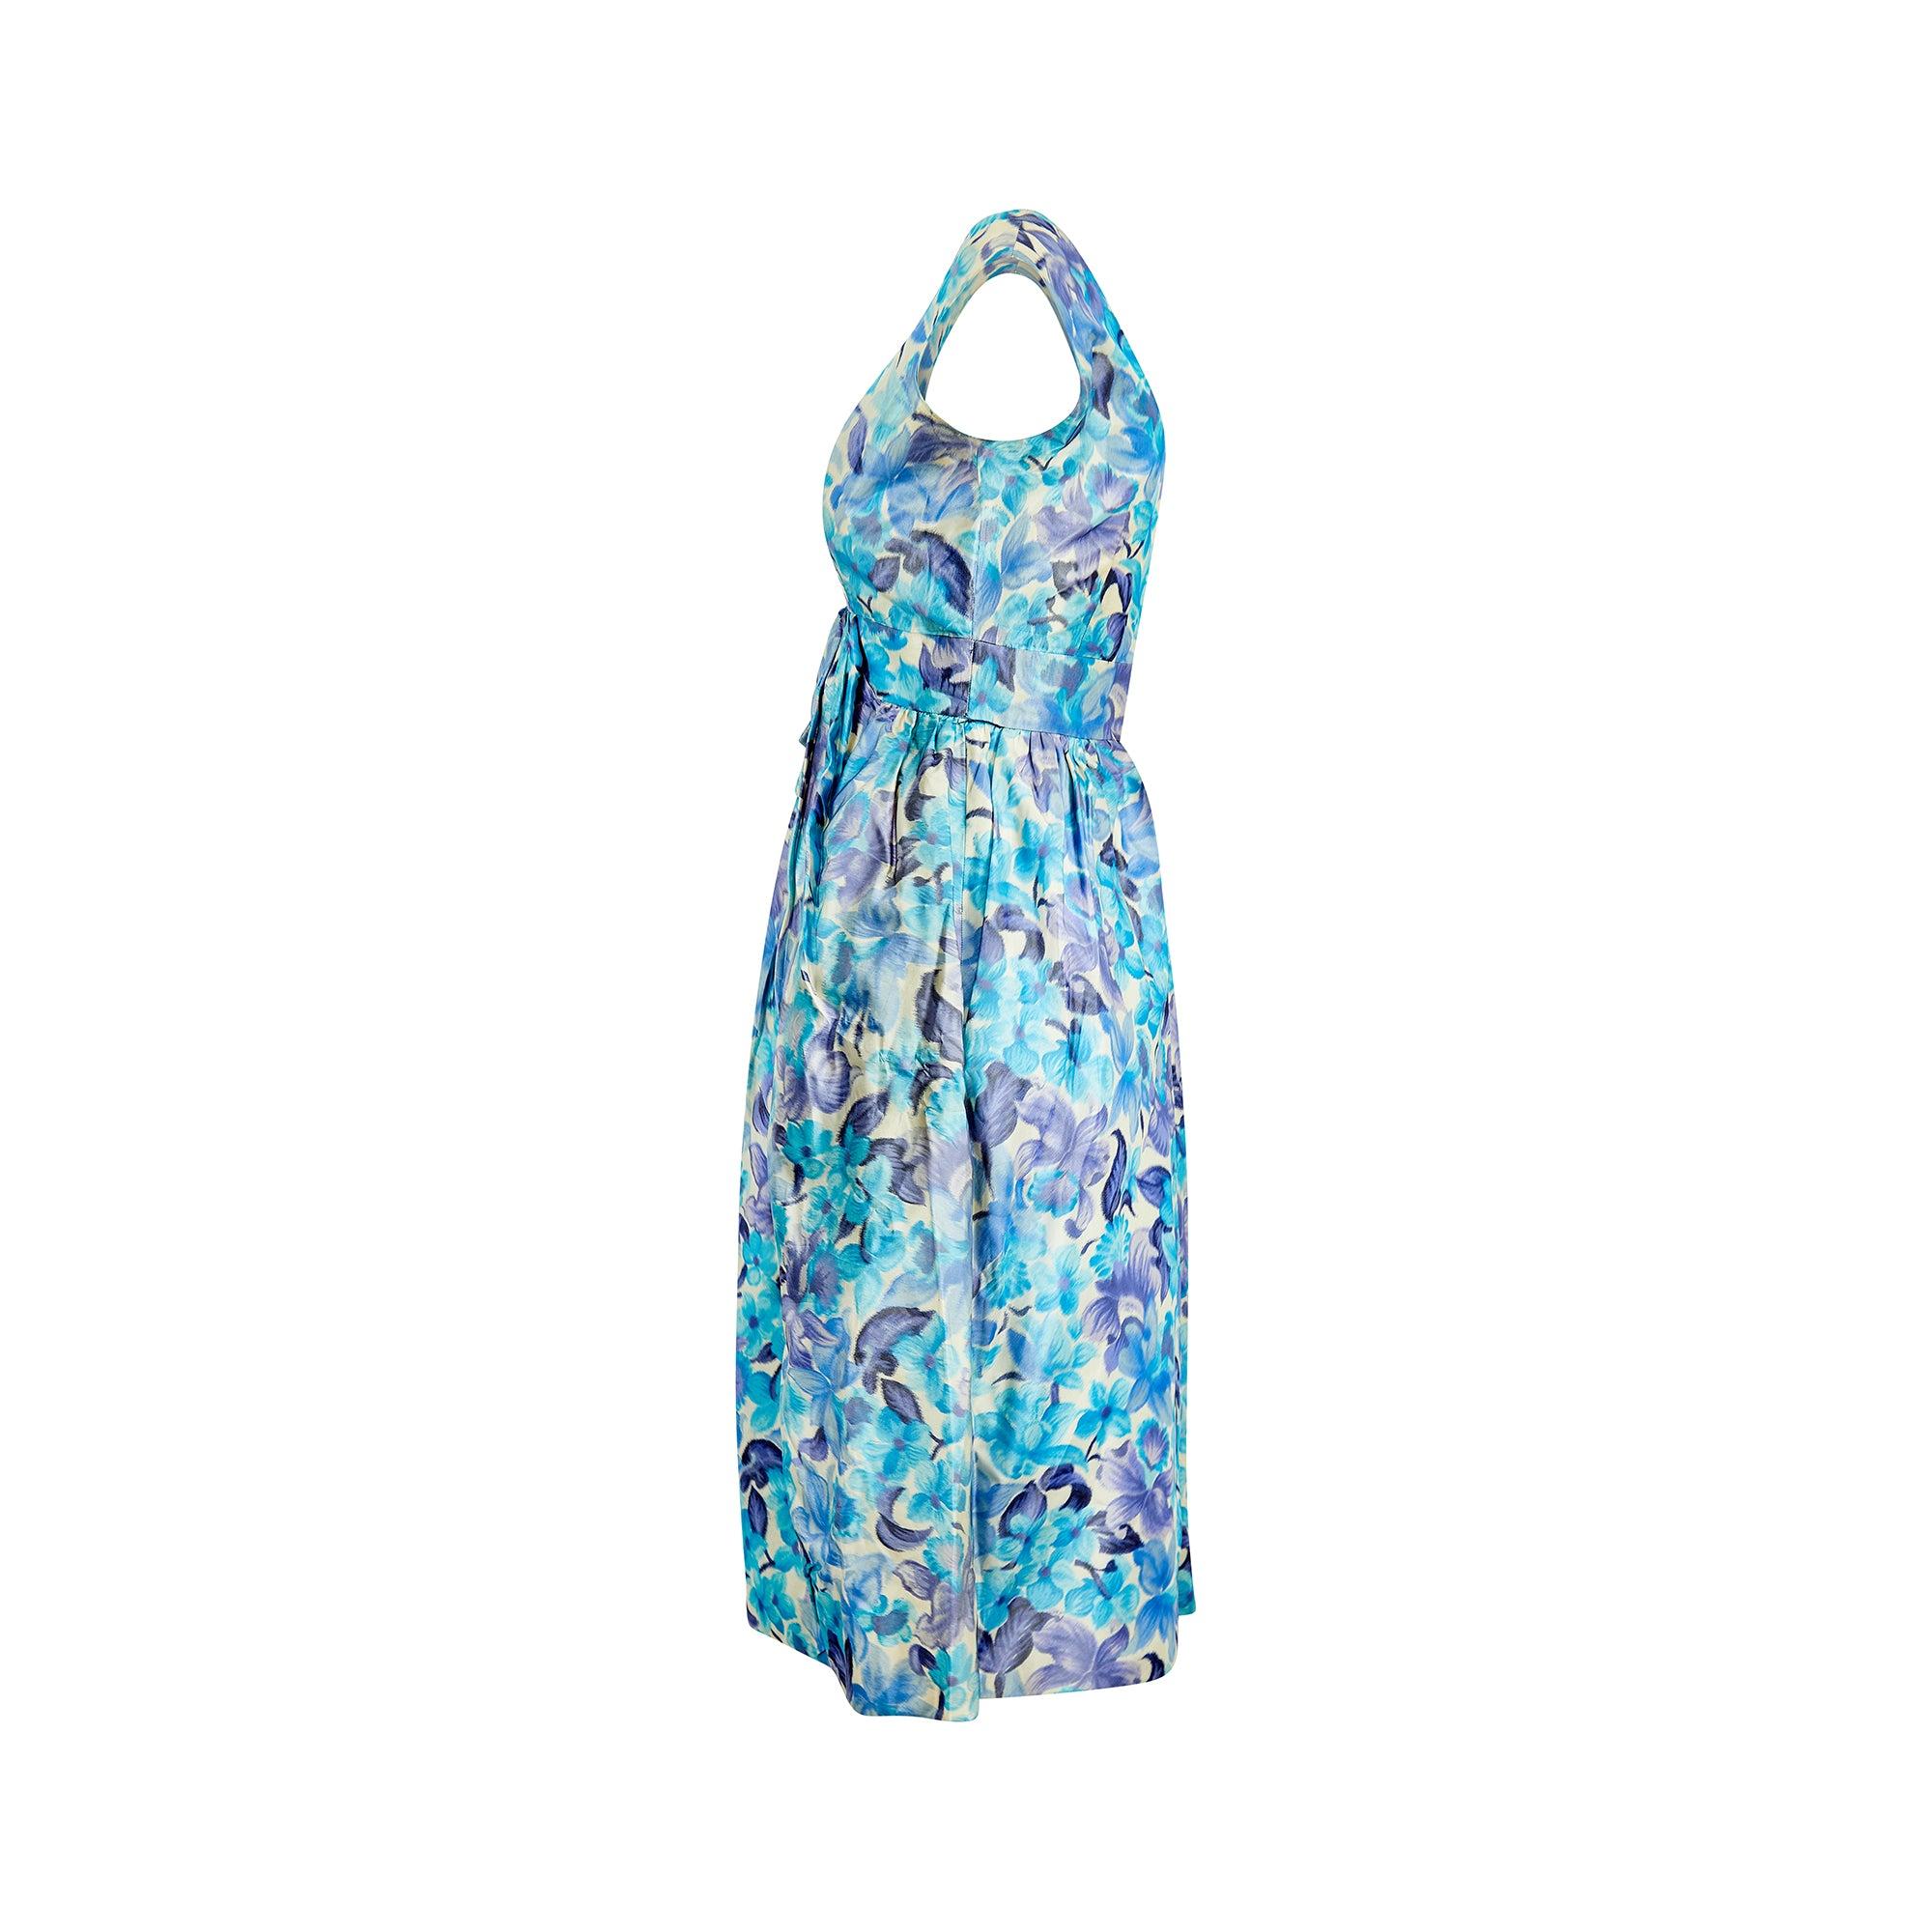 This dress is by Koupy Couture and is crafted from silk printed with bright blue and lilac florals. A feminine feature of many 1960s’ designs, a wide V-neckline reveals the collarbones and décolletage. The nipped-in waist and cocooning pleating of